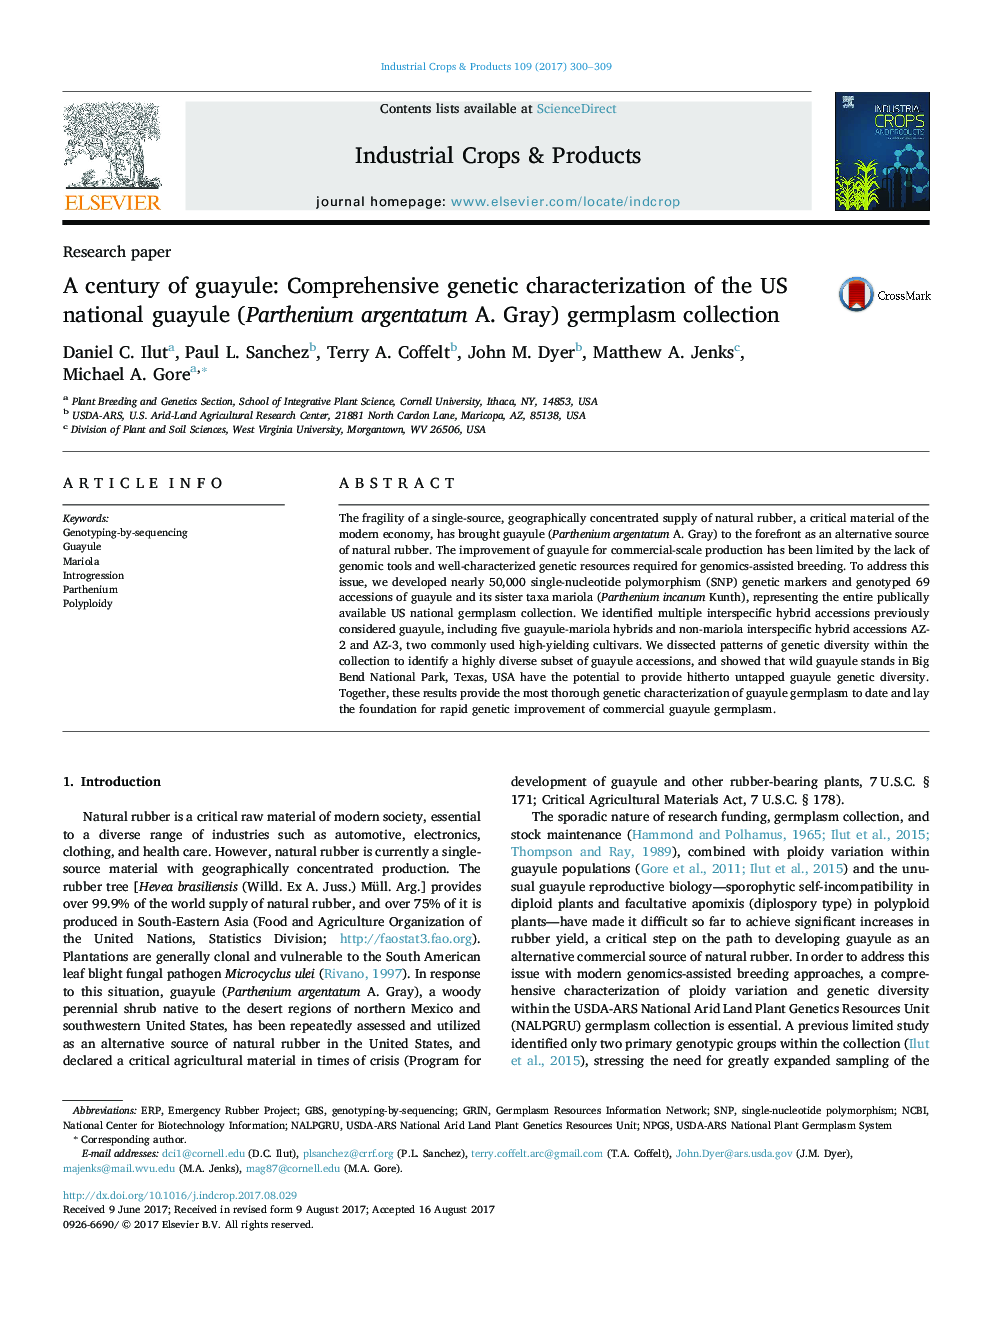 A century of guayule: Comprehensive genetic characterization of the US national guayule (Parthenium argentatum A. Gray) germplasm collection